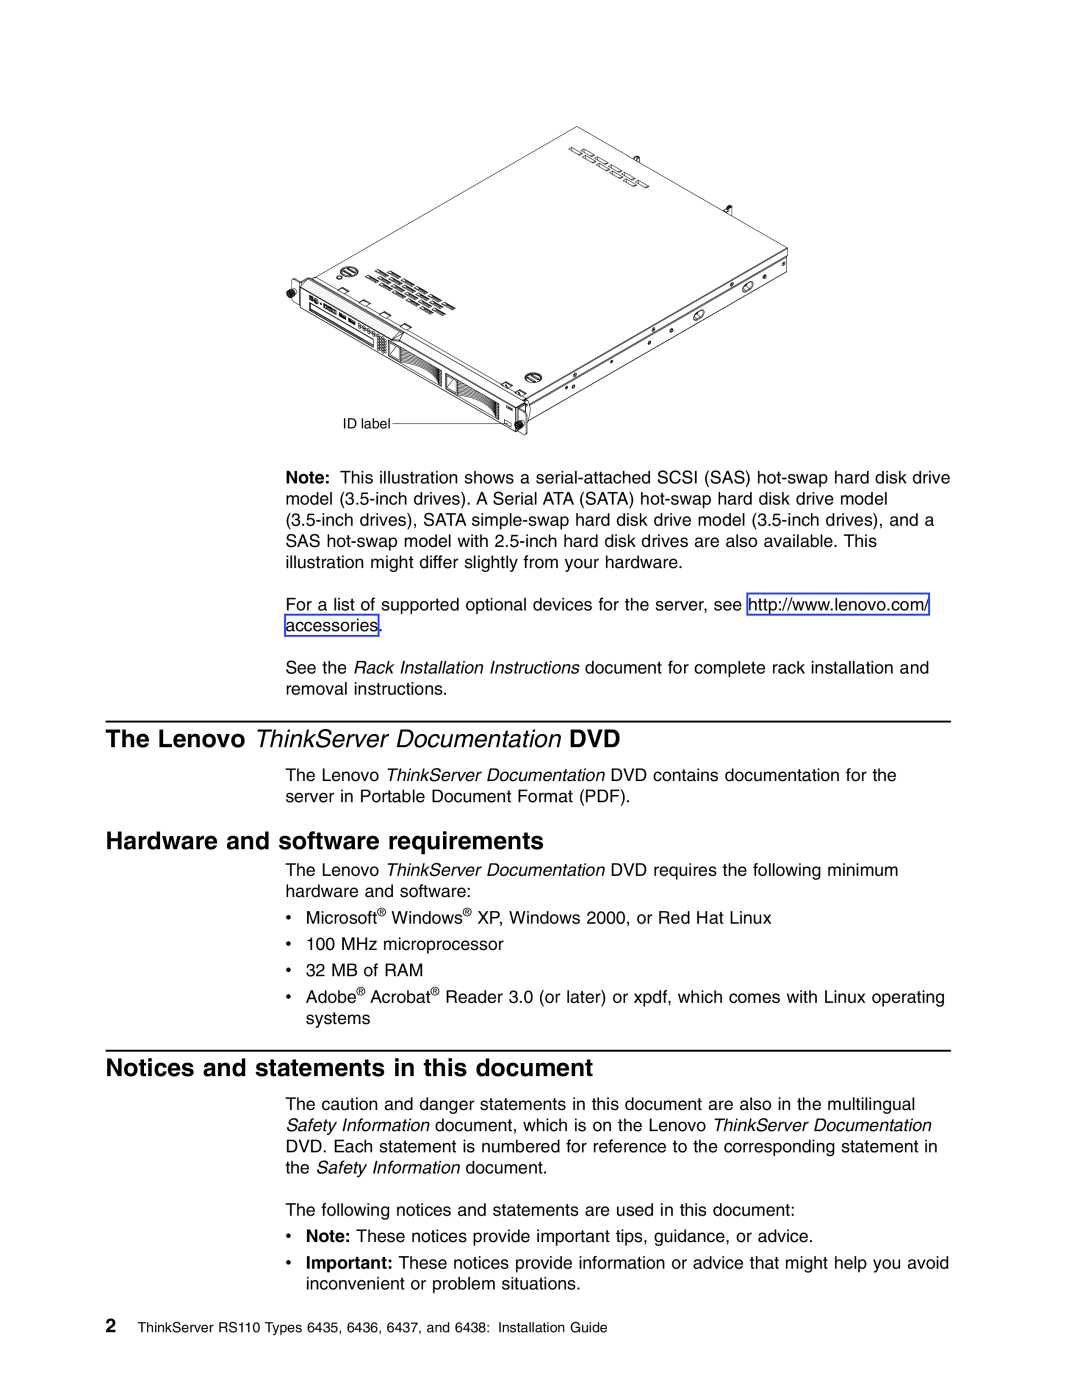 Lenovo 6438, 6437, 6436, 6435 manual Hardware and software requirements, Notices and statements in this document 